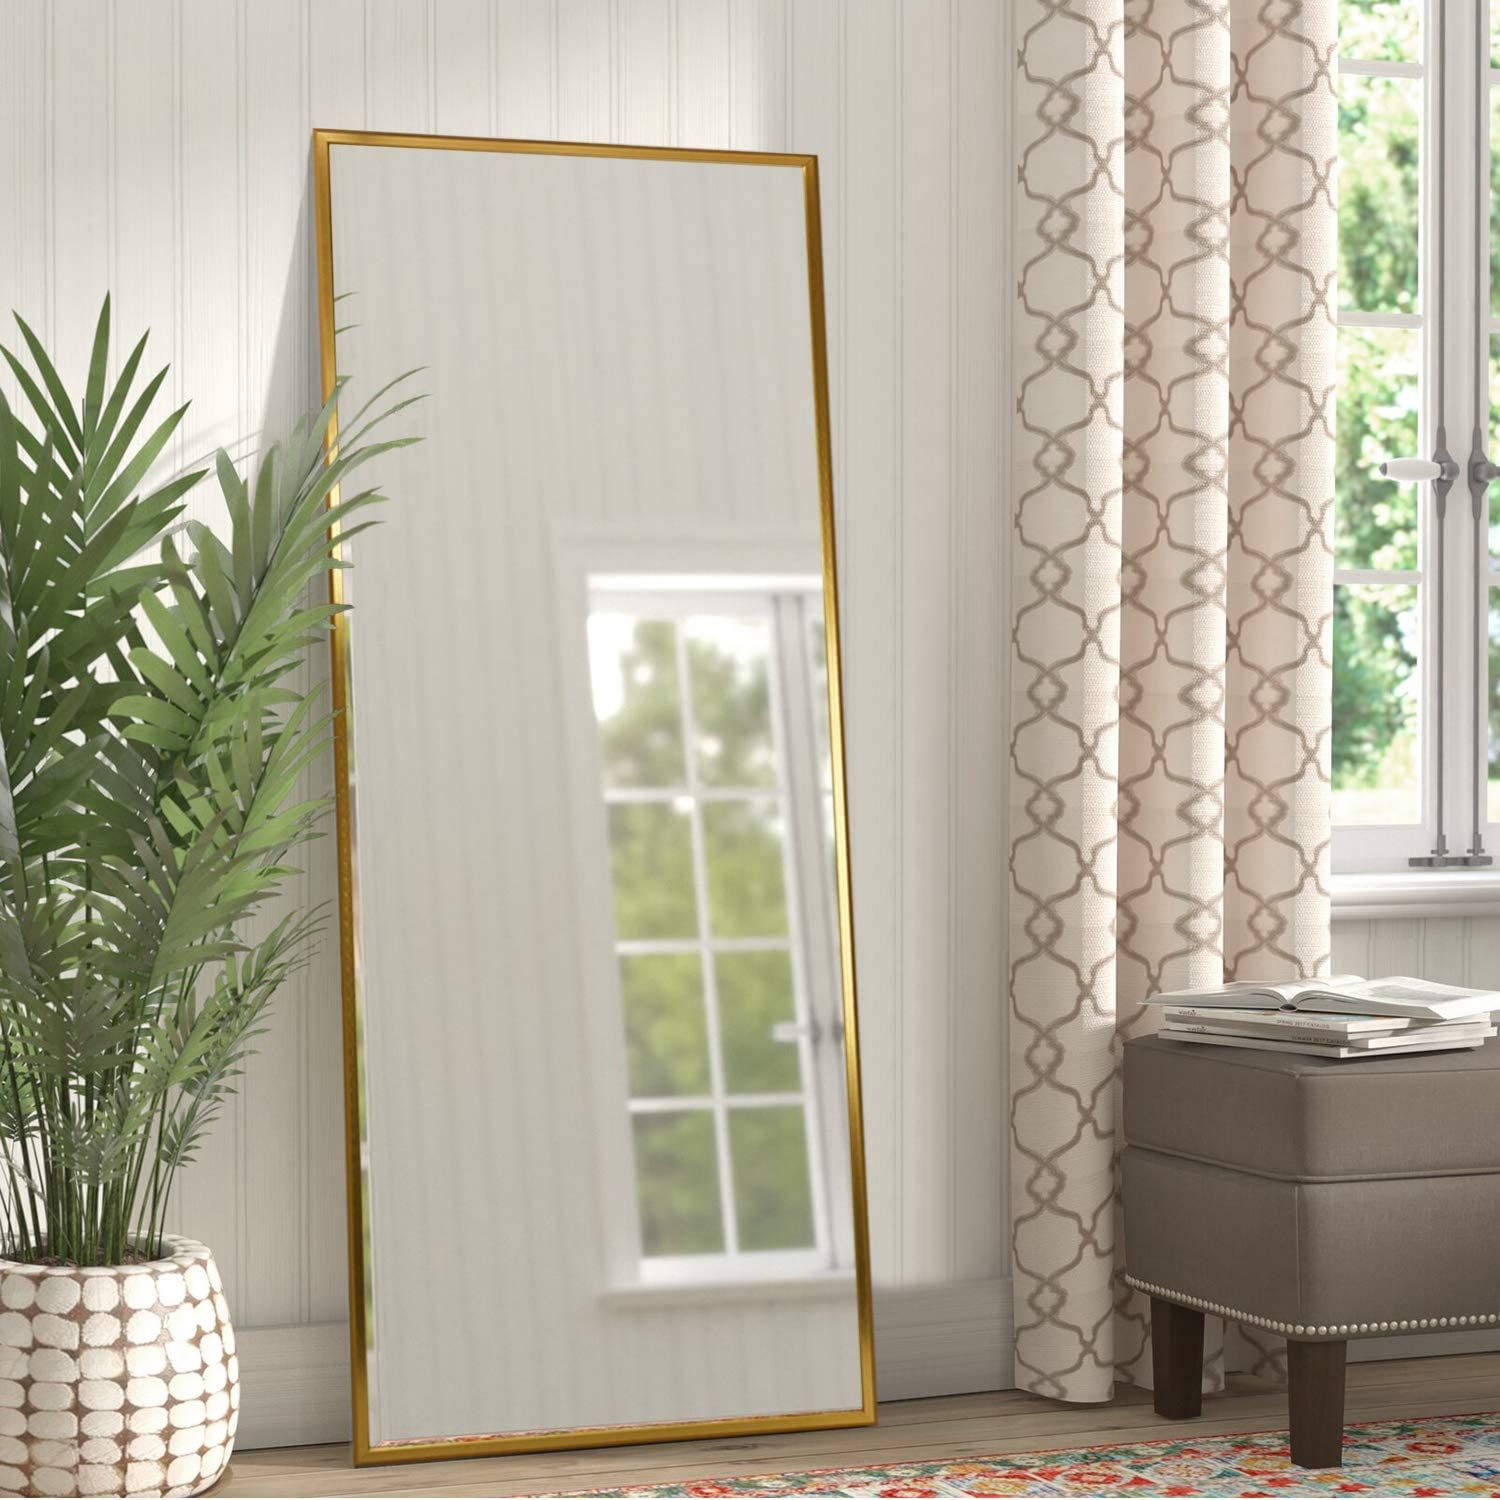 Full Length Mirror Floor Mirror Hanging/leaning Large Wall Mounted Pertaining To Full Length Floor Mirrors (View 9 of 15)